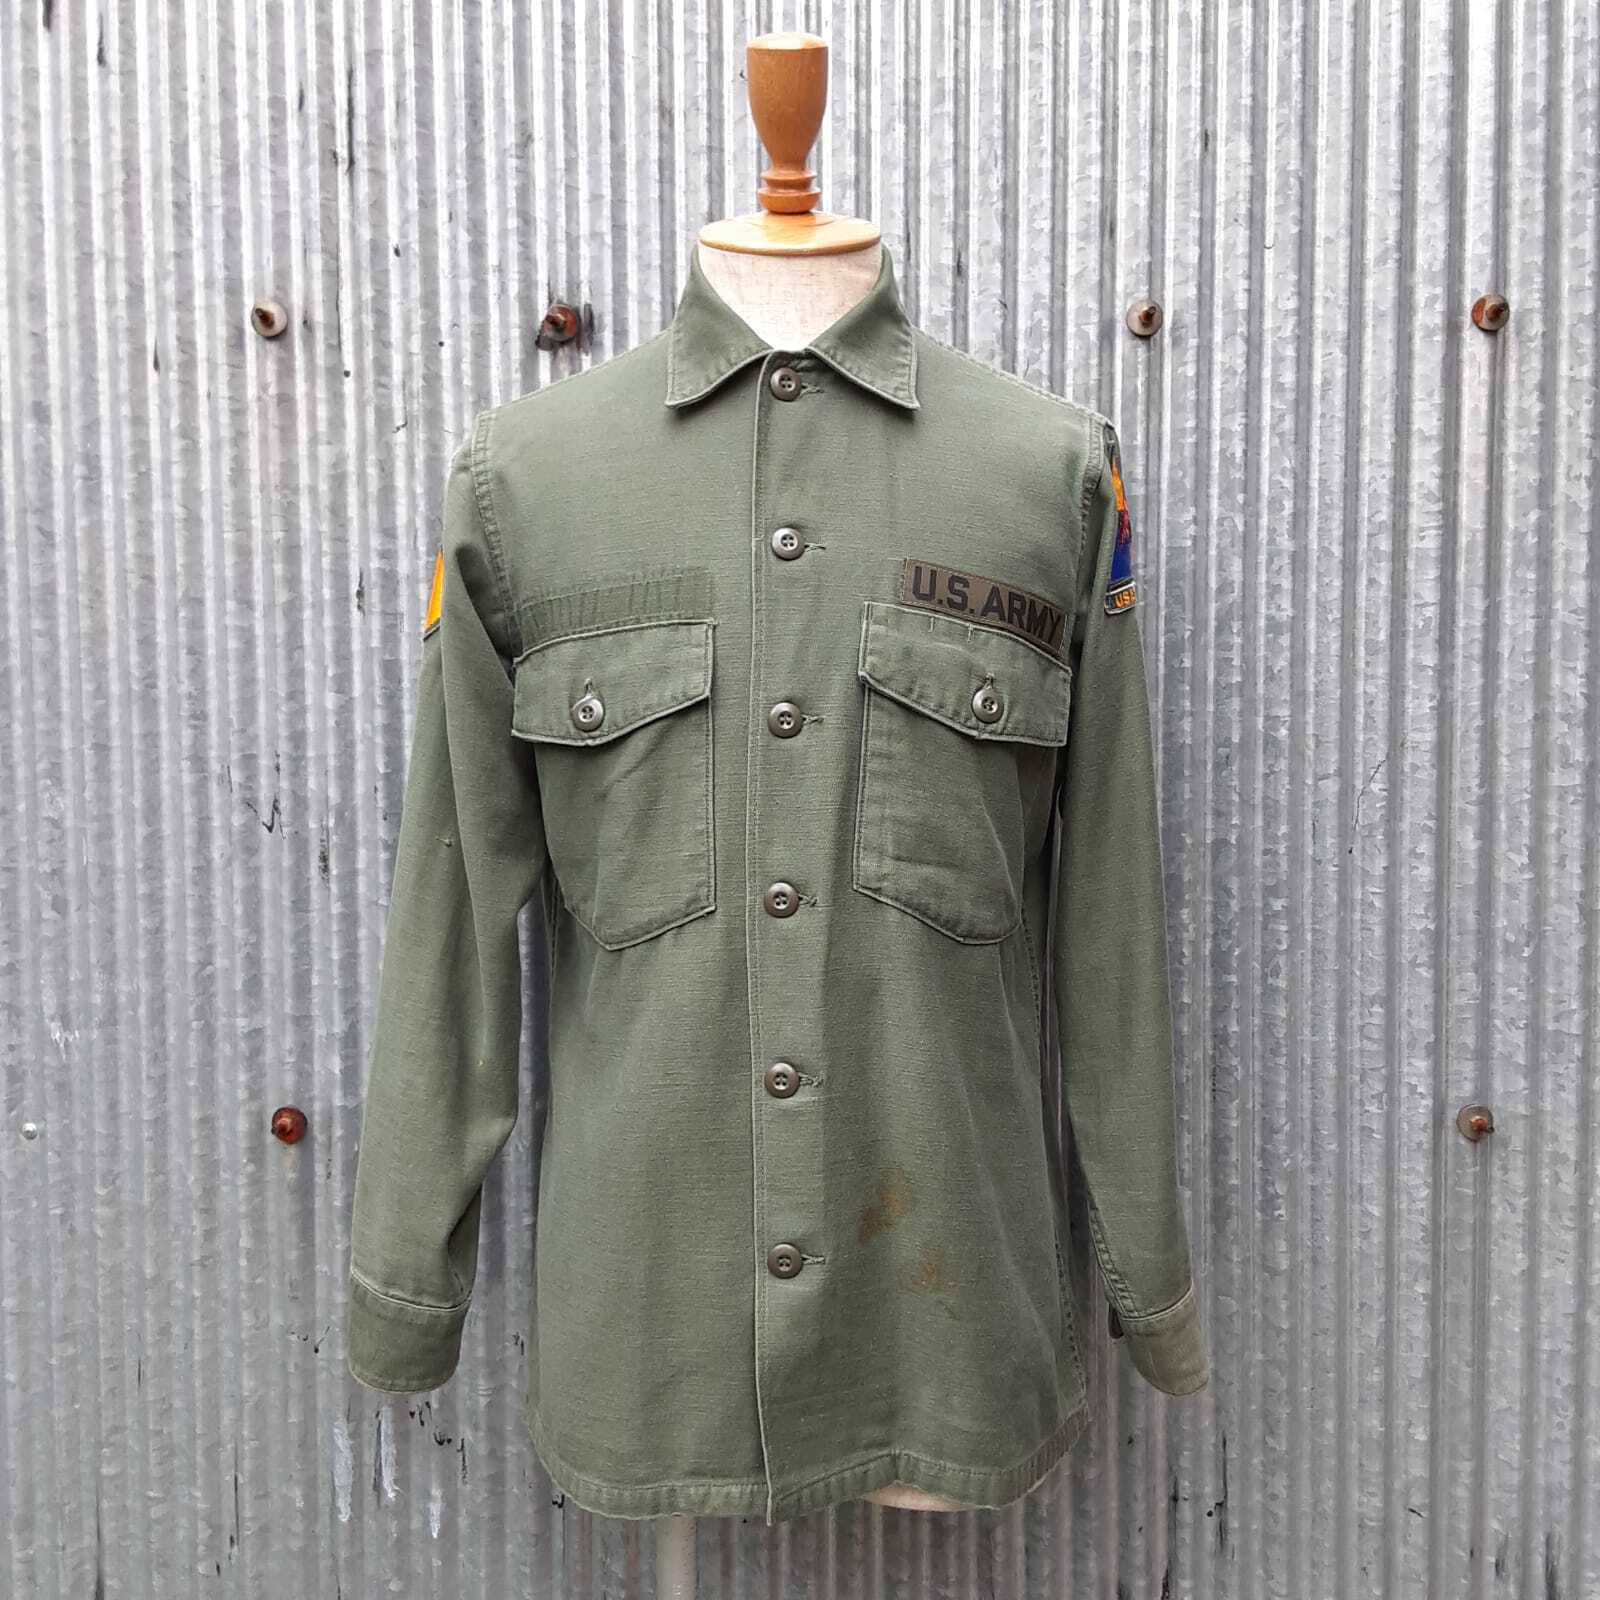 60's Vintage us army OG-107 utility shirts / 60年代 ヴィンテージ アメリカ陸軍 OG-107  ユーティリティシャツ | BIG TIME ｜ヴィンテージ 古着 BIGTIME（ビッグタイム） powered by BASE